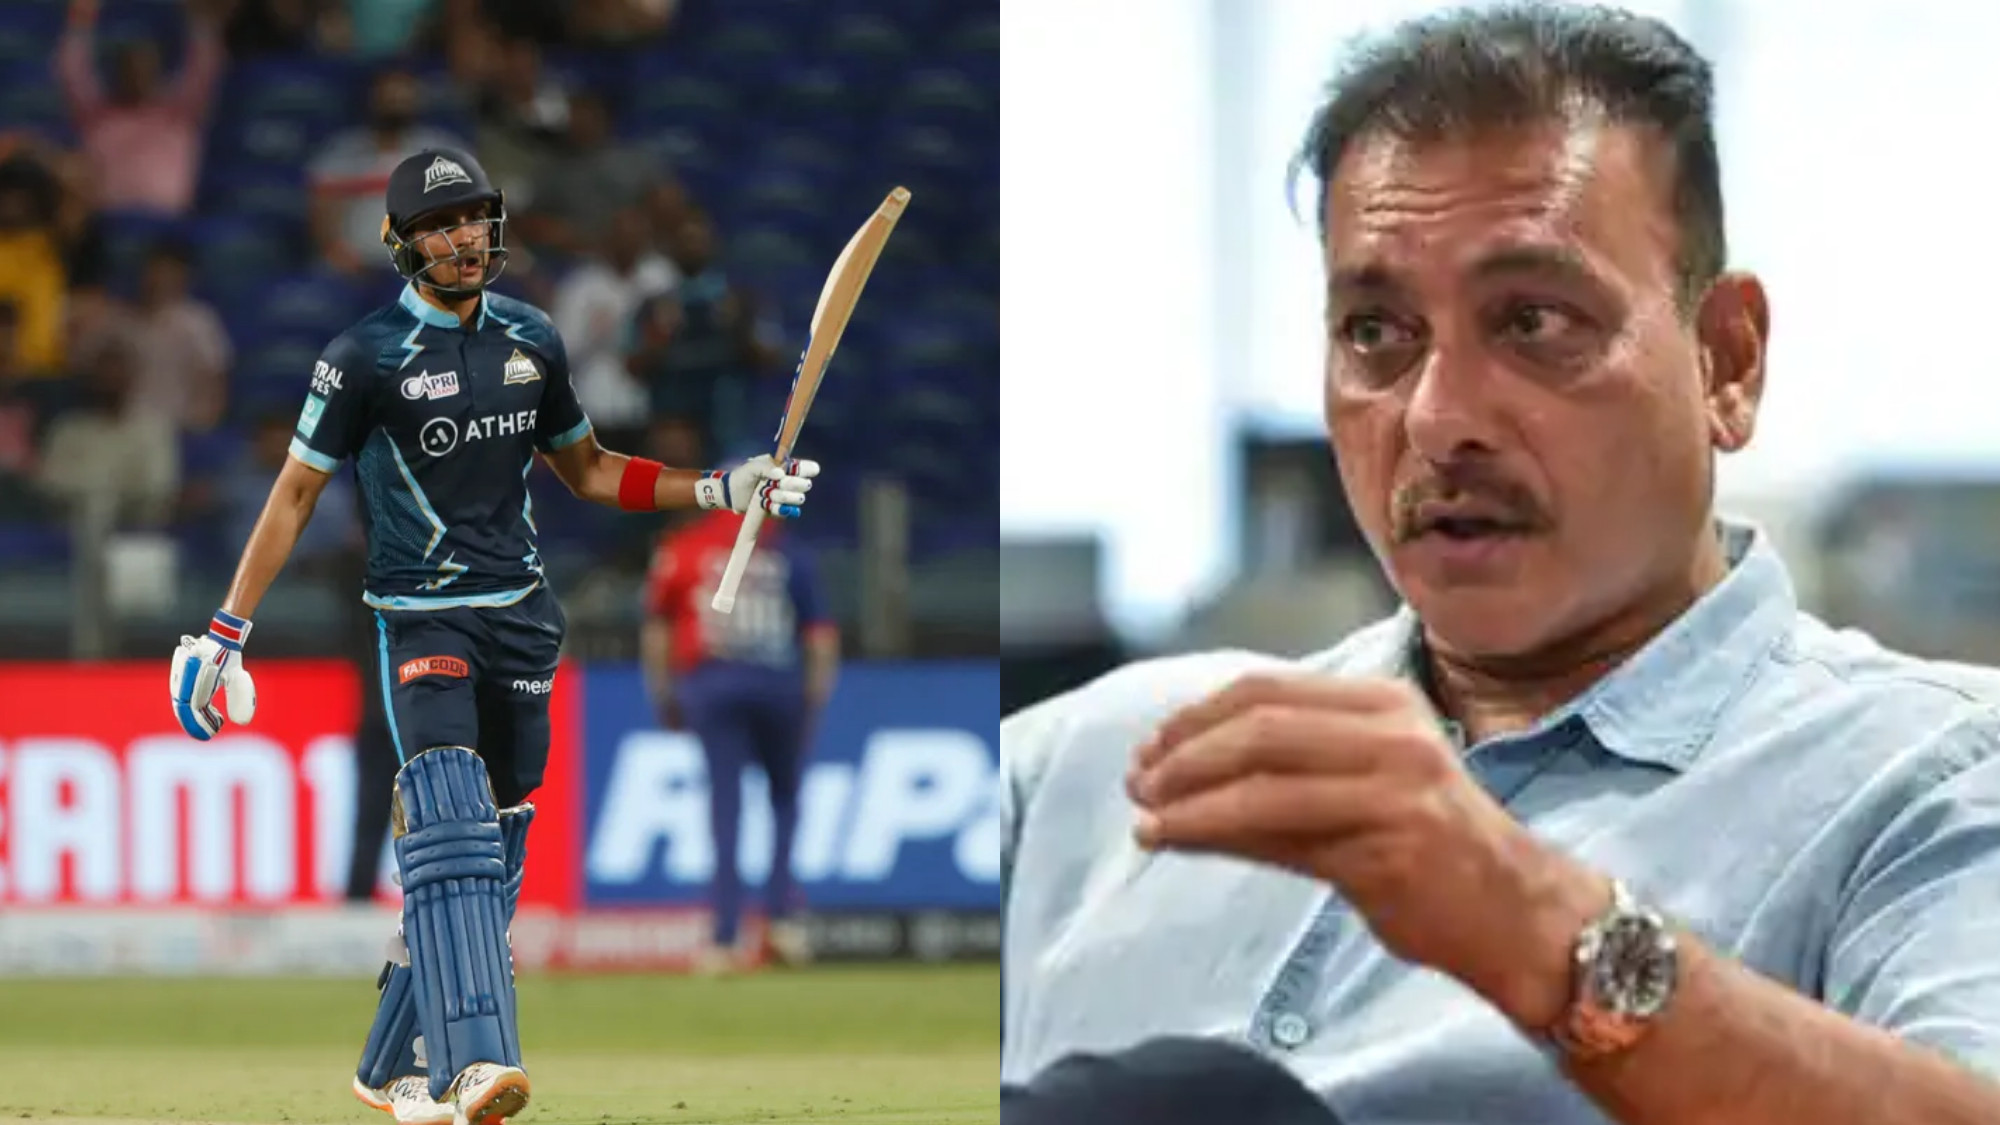 IPL 2022: Ravi Shastri lauds Shubman Gill as “one of the most talented players in world cricket”